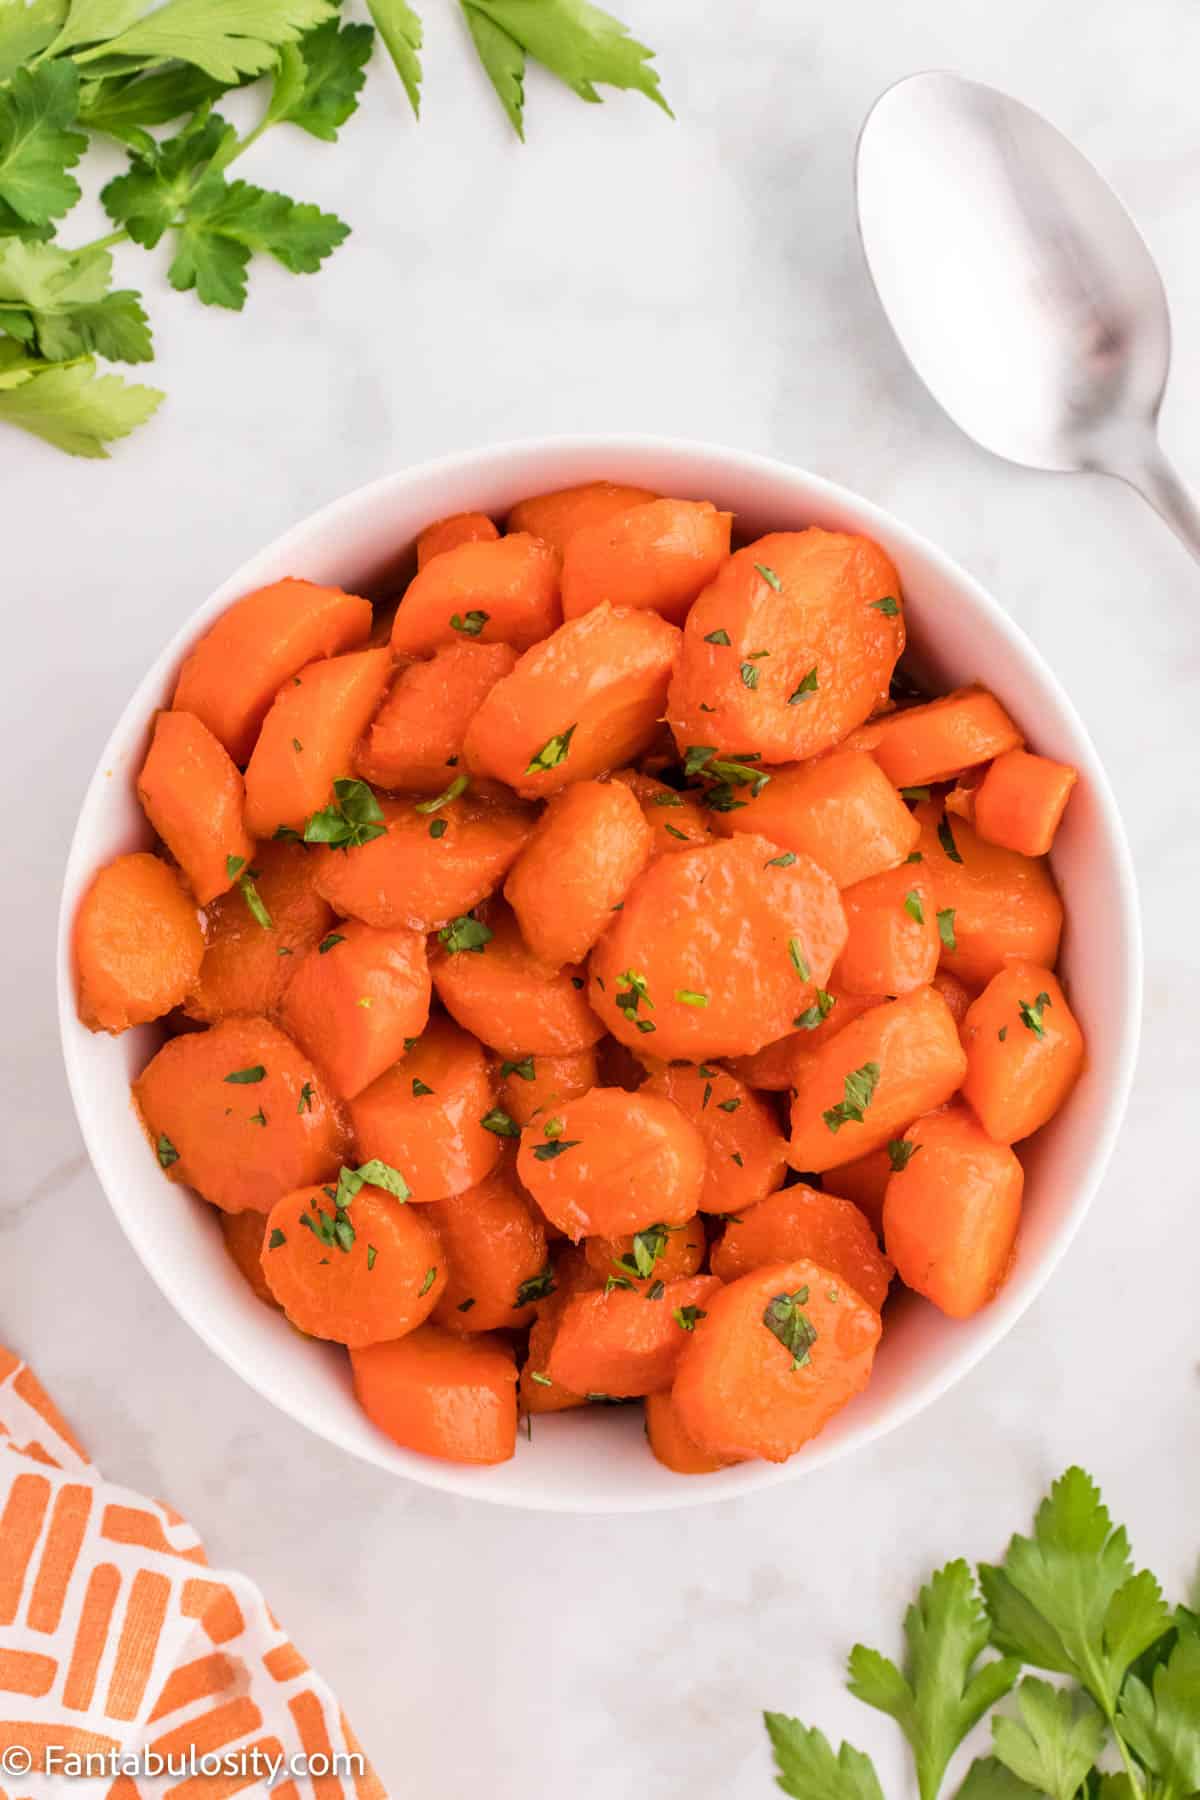 Cooked Candied Carrots are shown in a white serving bowl with a spoon in the upper right hand corner and an orange patterned napkin in the bottom left corner